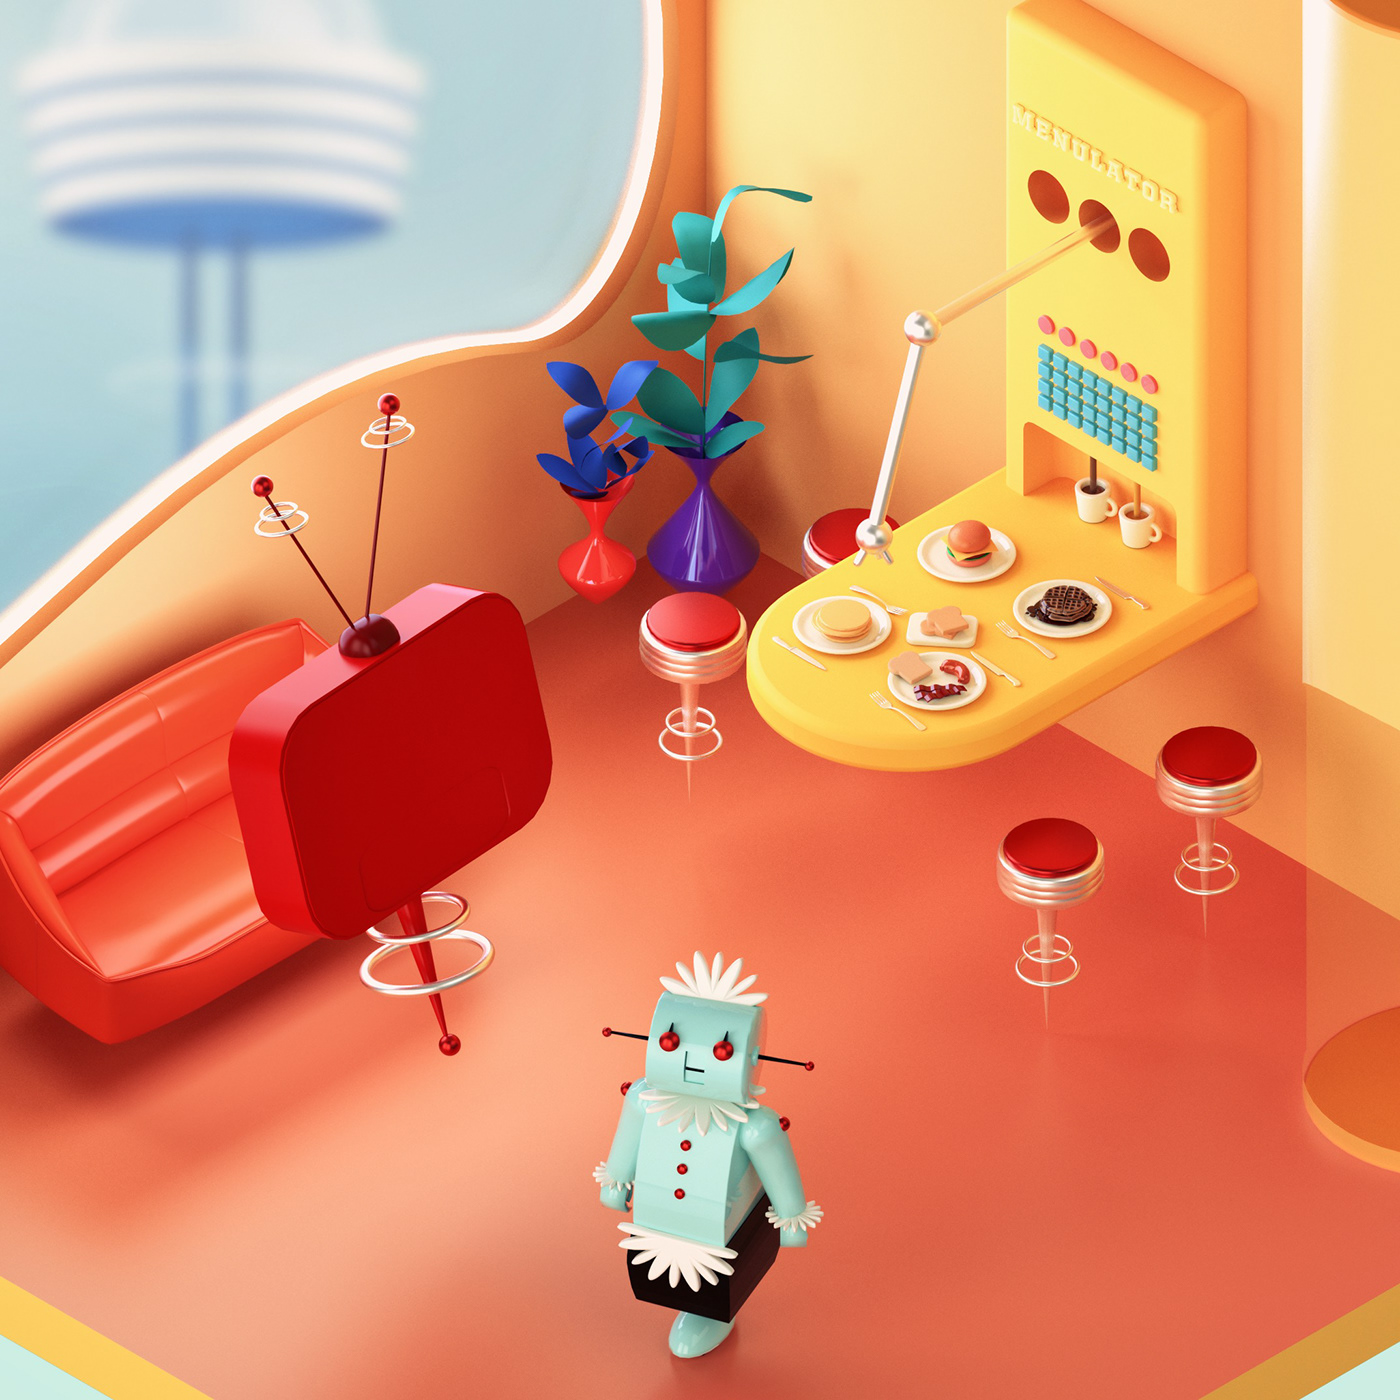 3D c4d cartoon network cinema4d free future Jetsons nostalgia rooms the rooms project